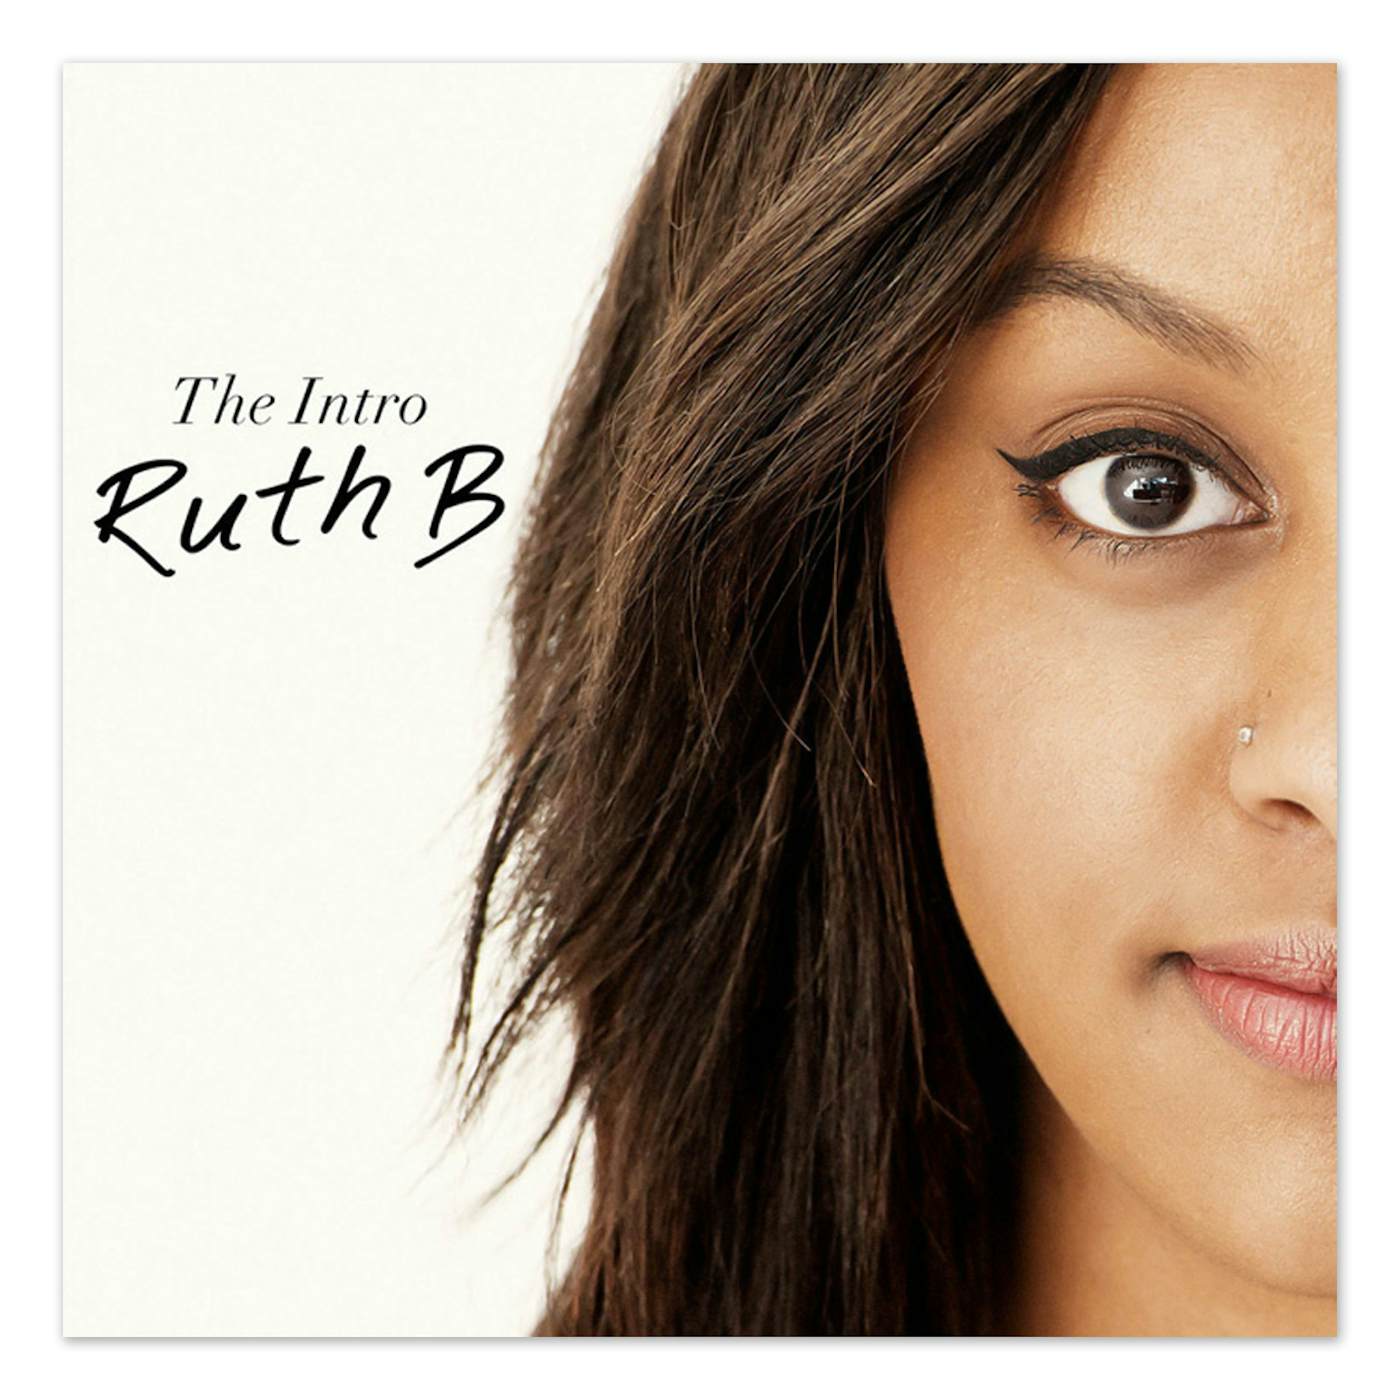 Ruth B. The Intro EP
CD